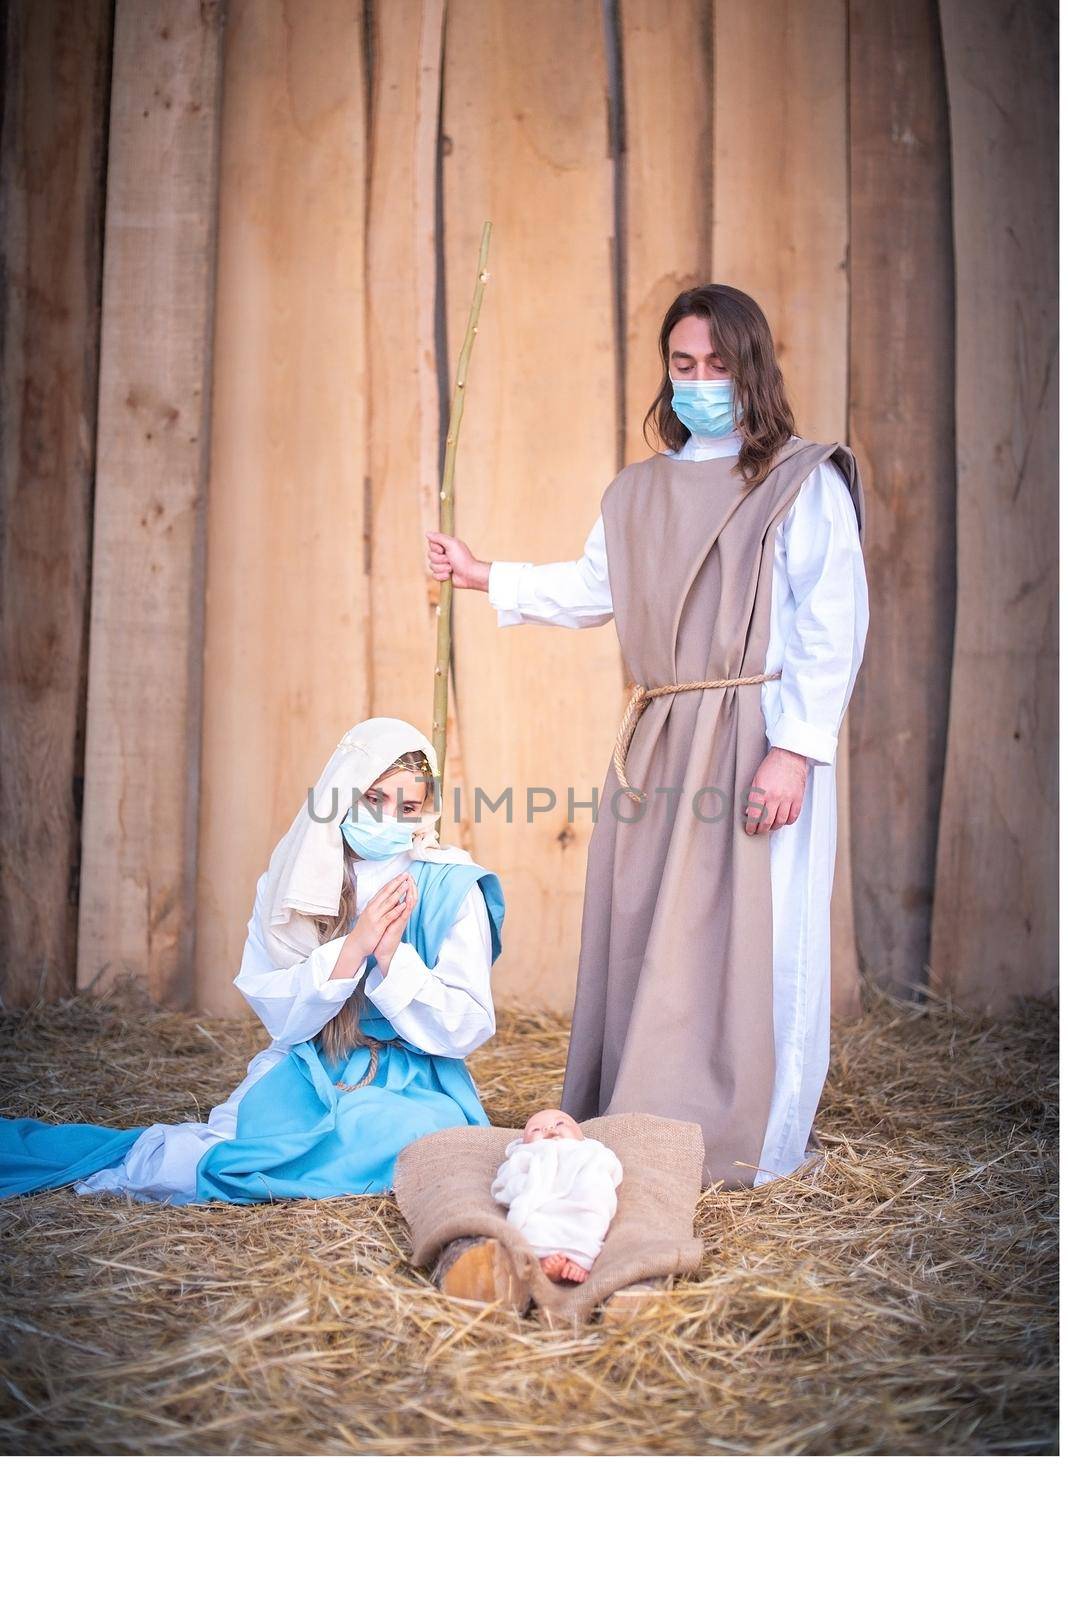 Vertical photo of a nativity scene with the characters wearing masks while adoring Jesus baby